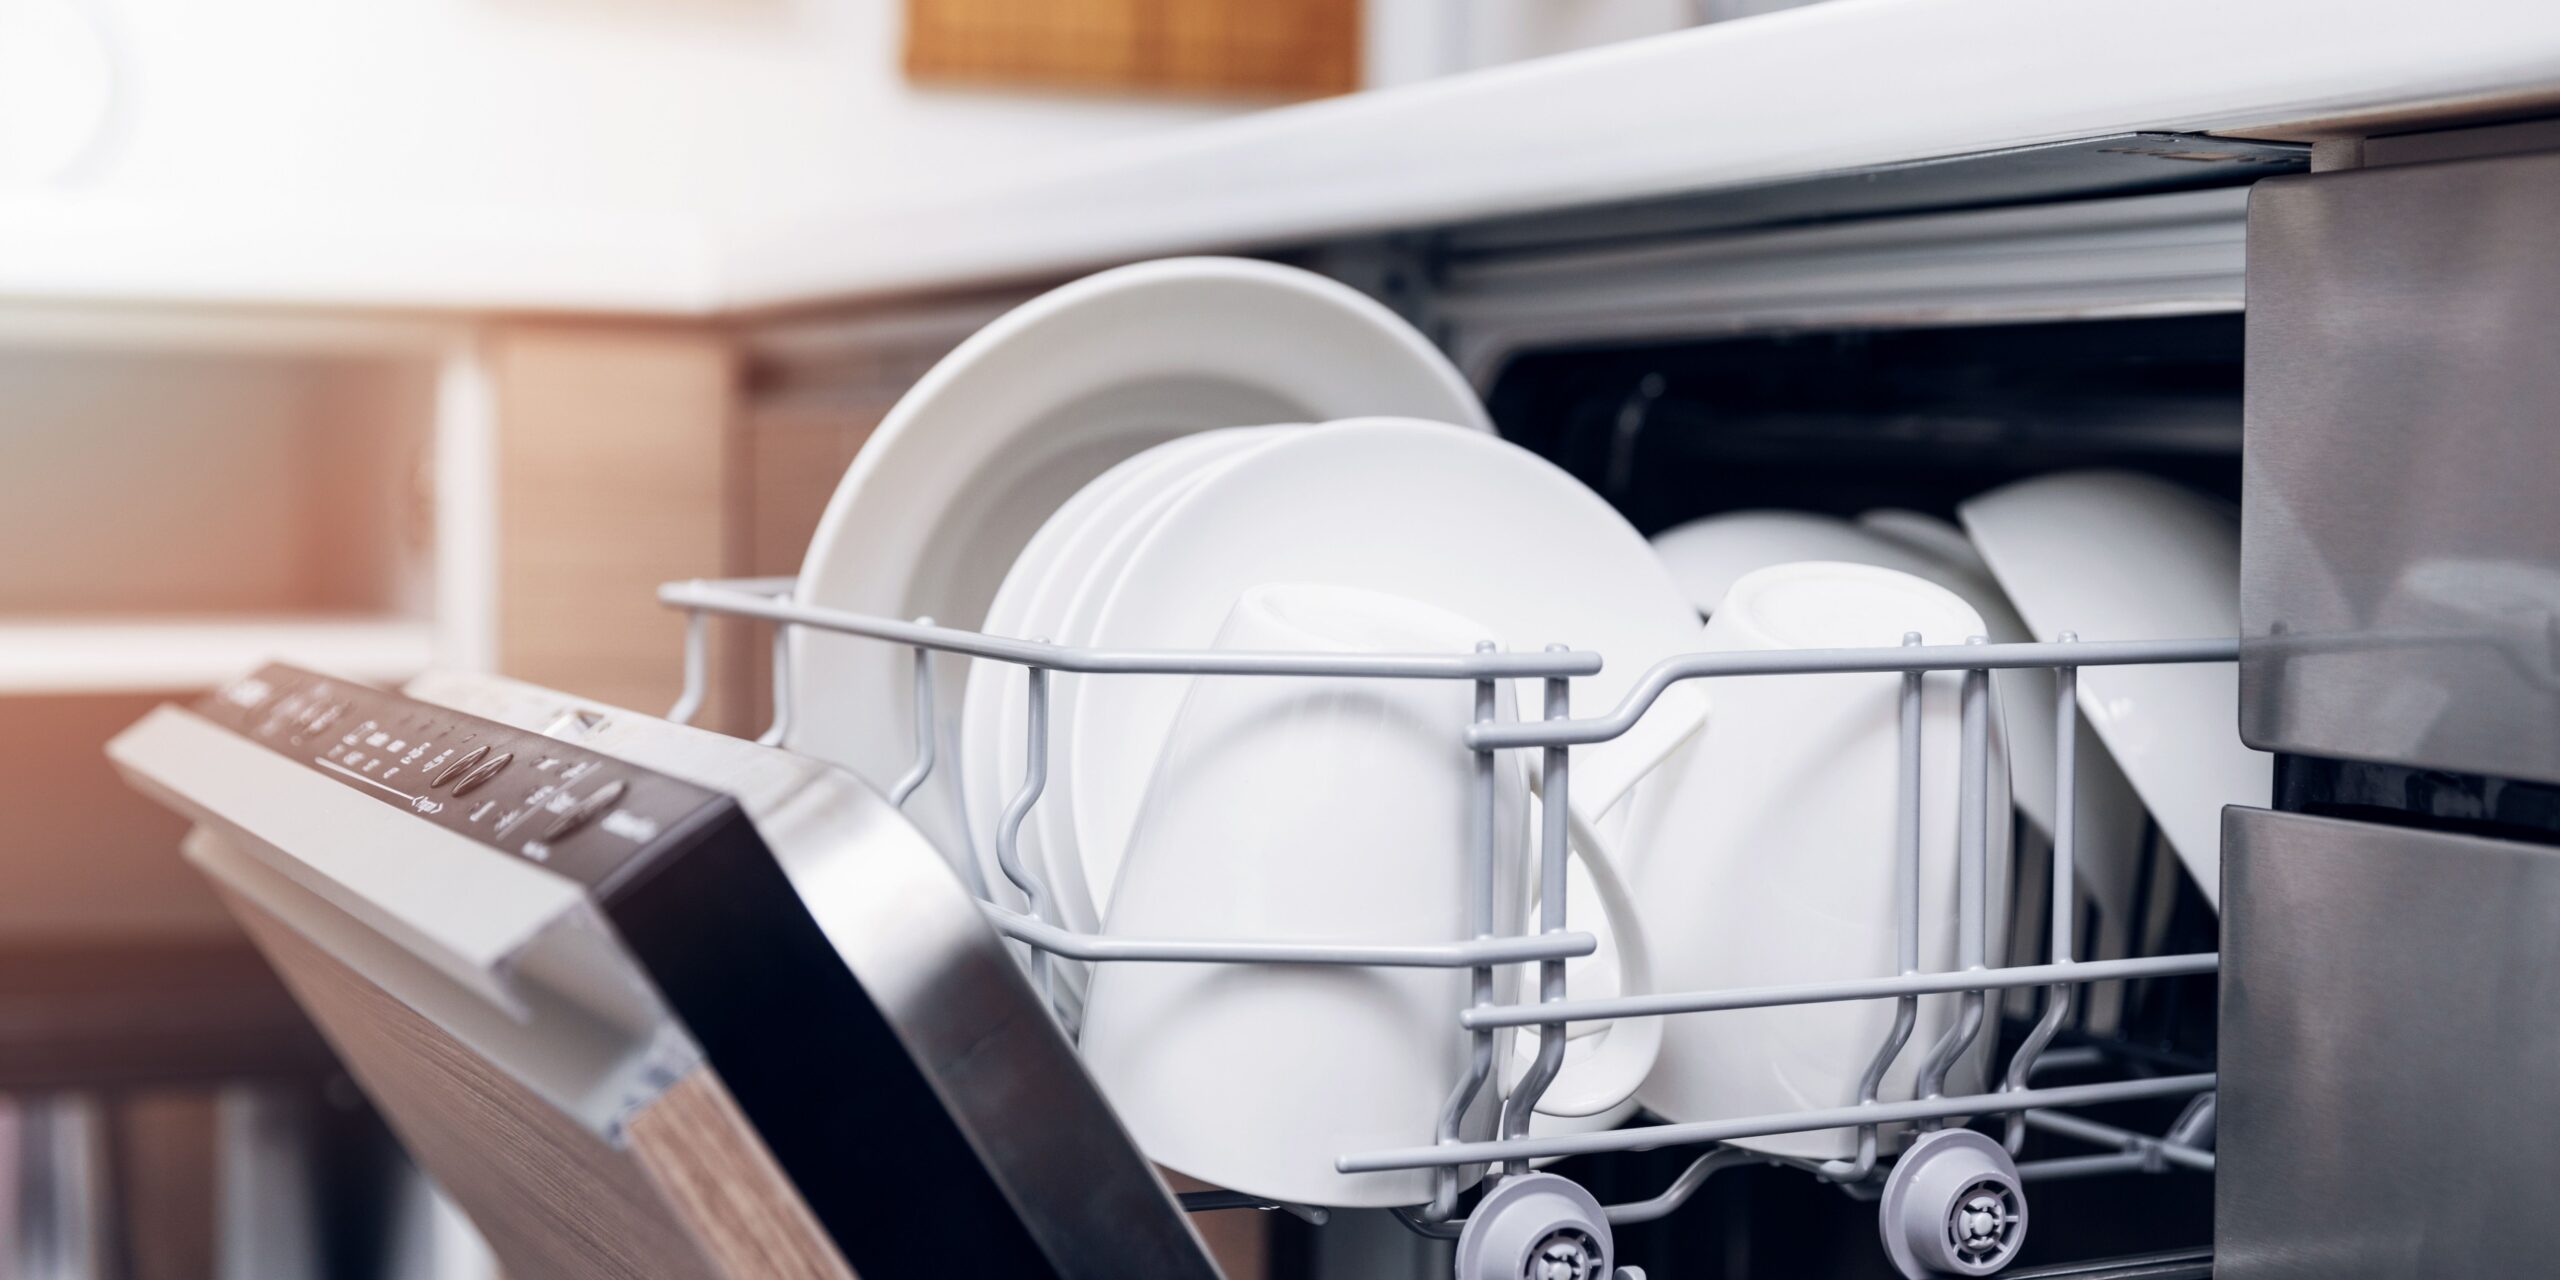 How To Clean a Dishwasher Filter